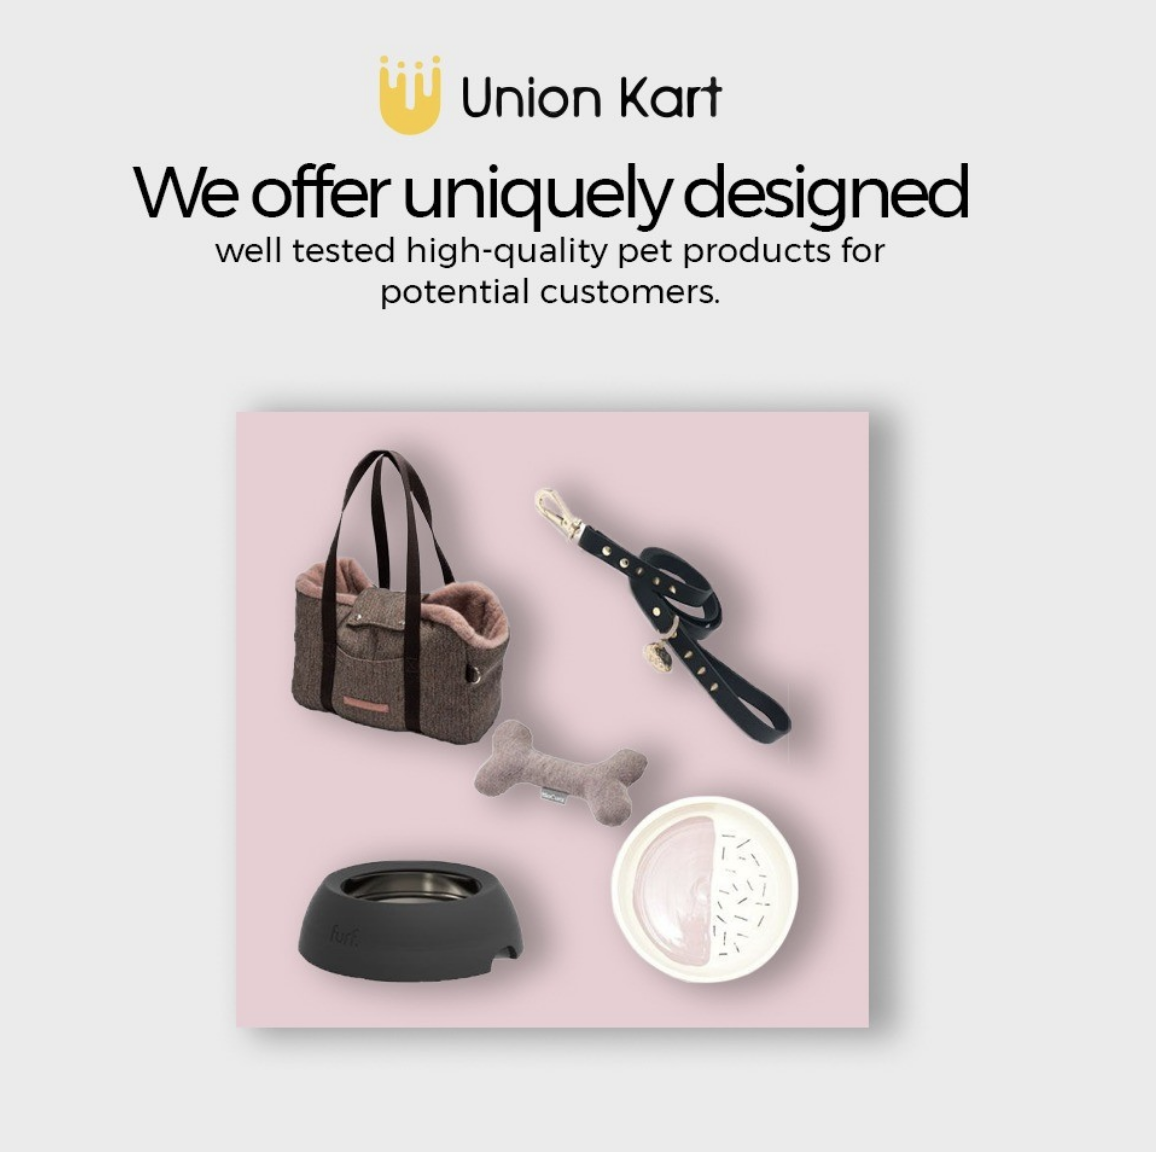 Union Kart - The Perfect One-Stop Shop For All Your Needs